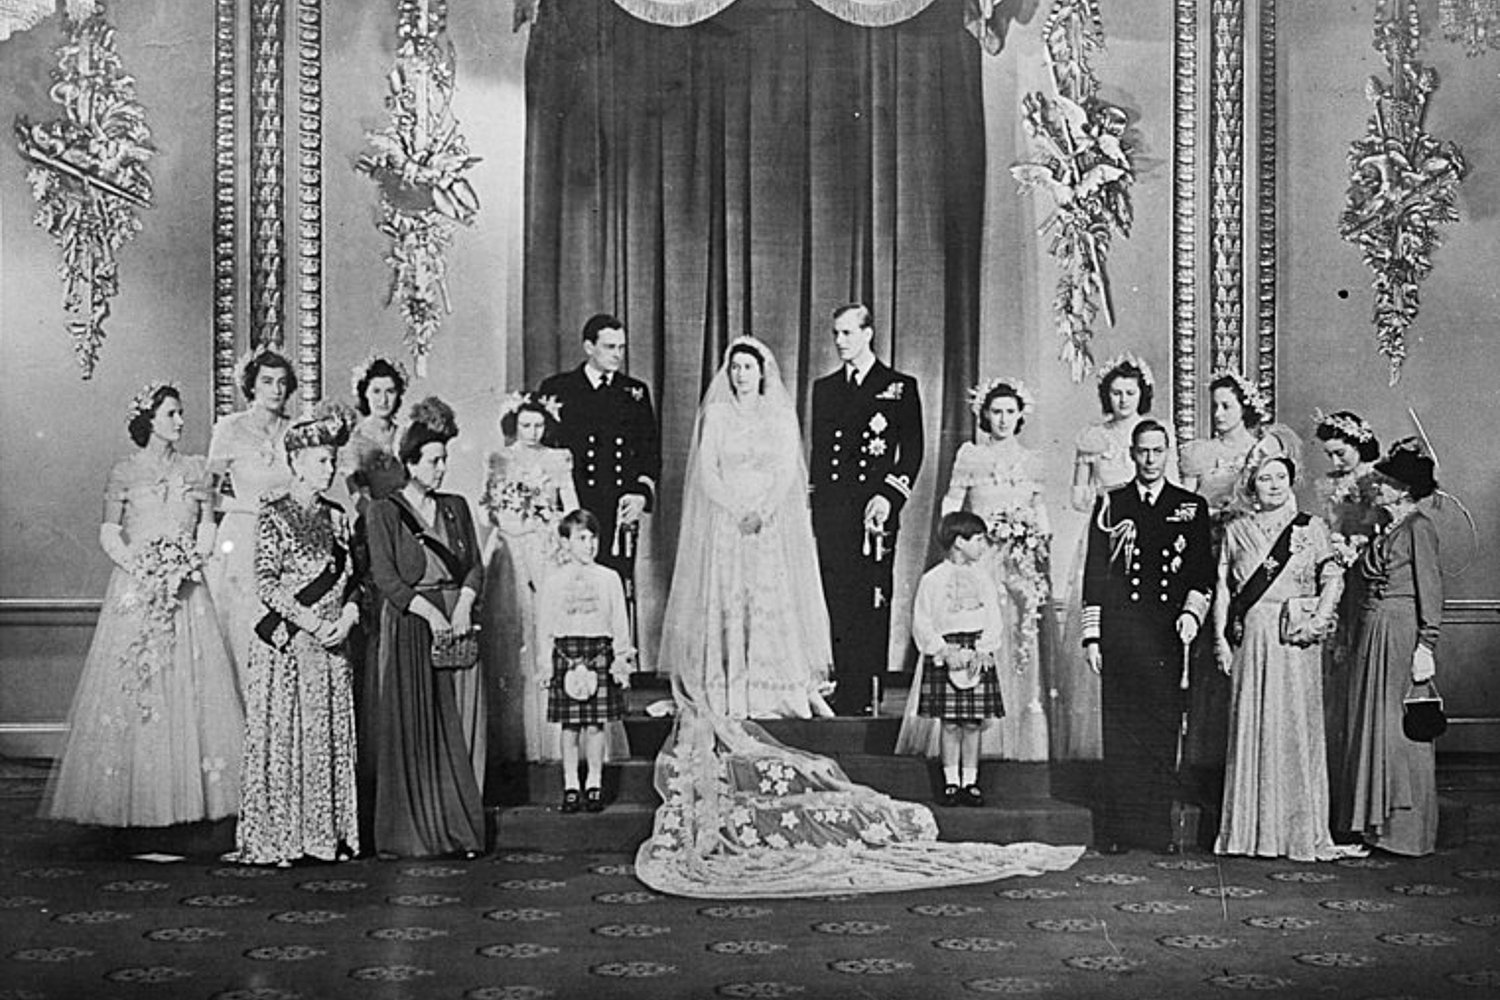 Photograph of Queen Elizabeth II and Commonwealth leaders, taken at the 1960 Commonwealth Conference, front row of Windsor Castle: (left to right) EJ Cooray, Walter Nash, Jawaharlal Nehru, Elizabeth II, John Diefenbaker, Robert Menzies, Eric Louw Back row: Tunku Abdul Rahman, Roy Welensky, Harold Macmillan, Mohammed Ayub Khan, Kwame Nkrumah